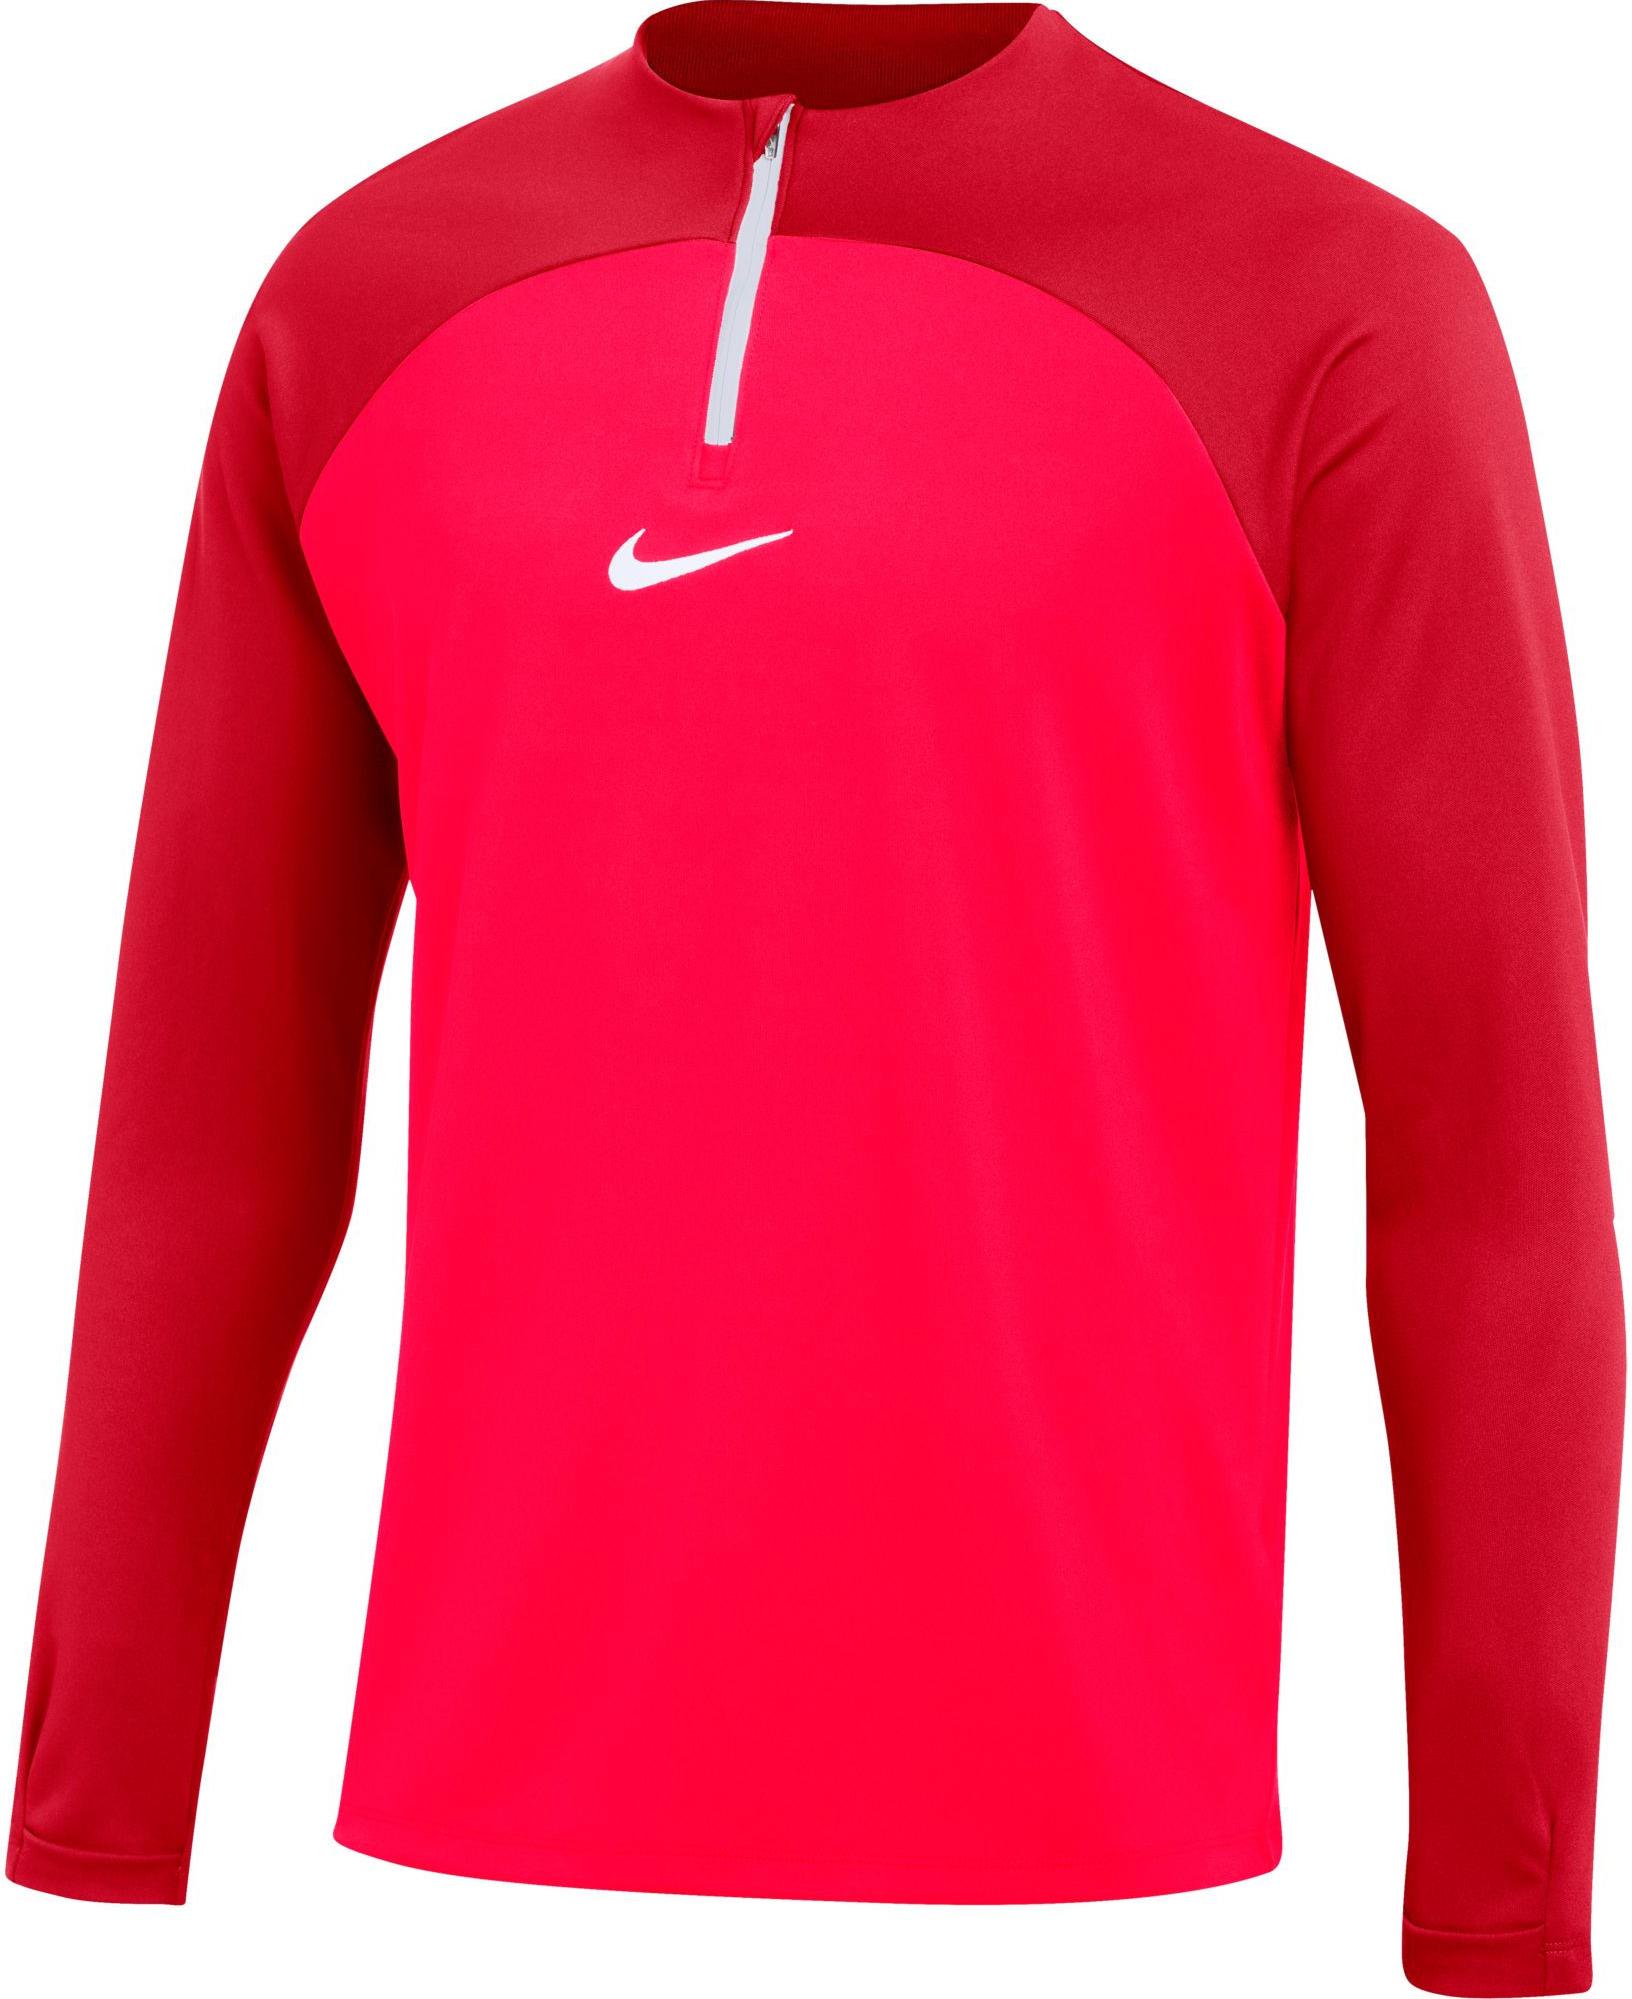 nike academy pro drill top 412298 dh9230 635